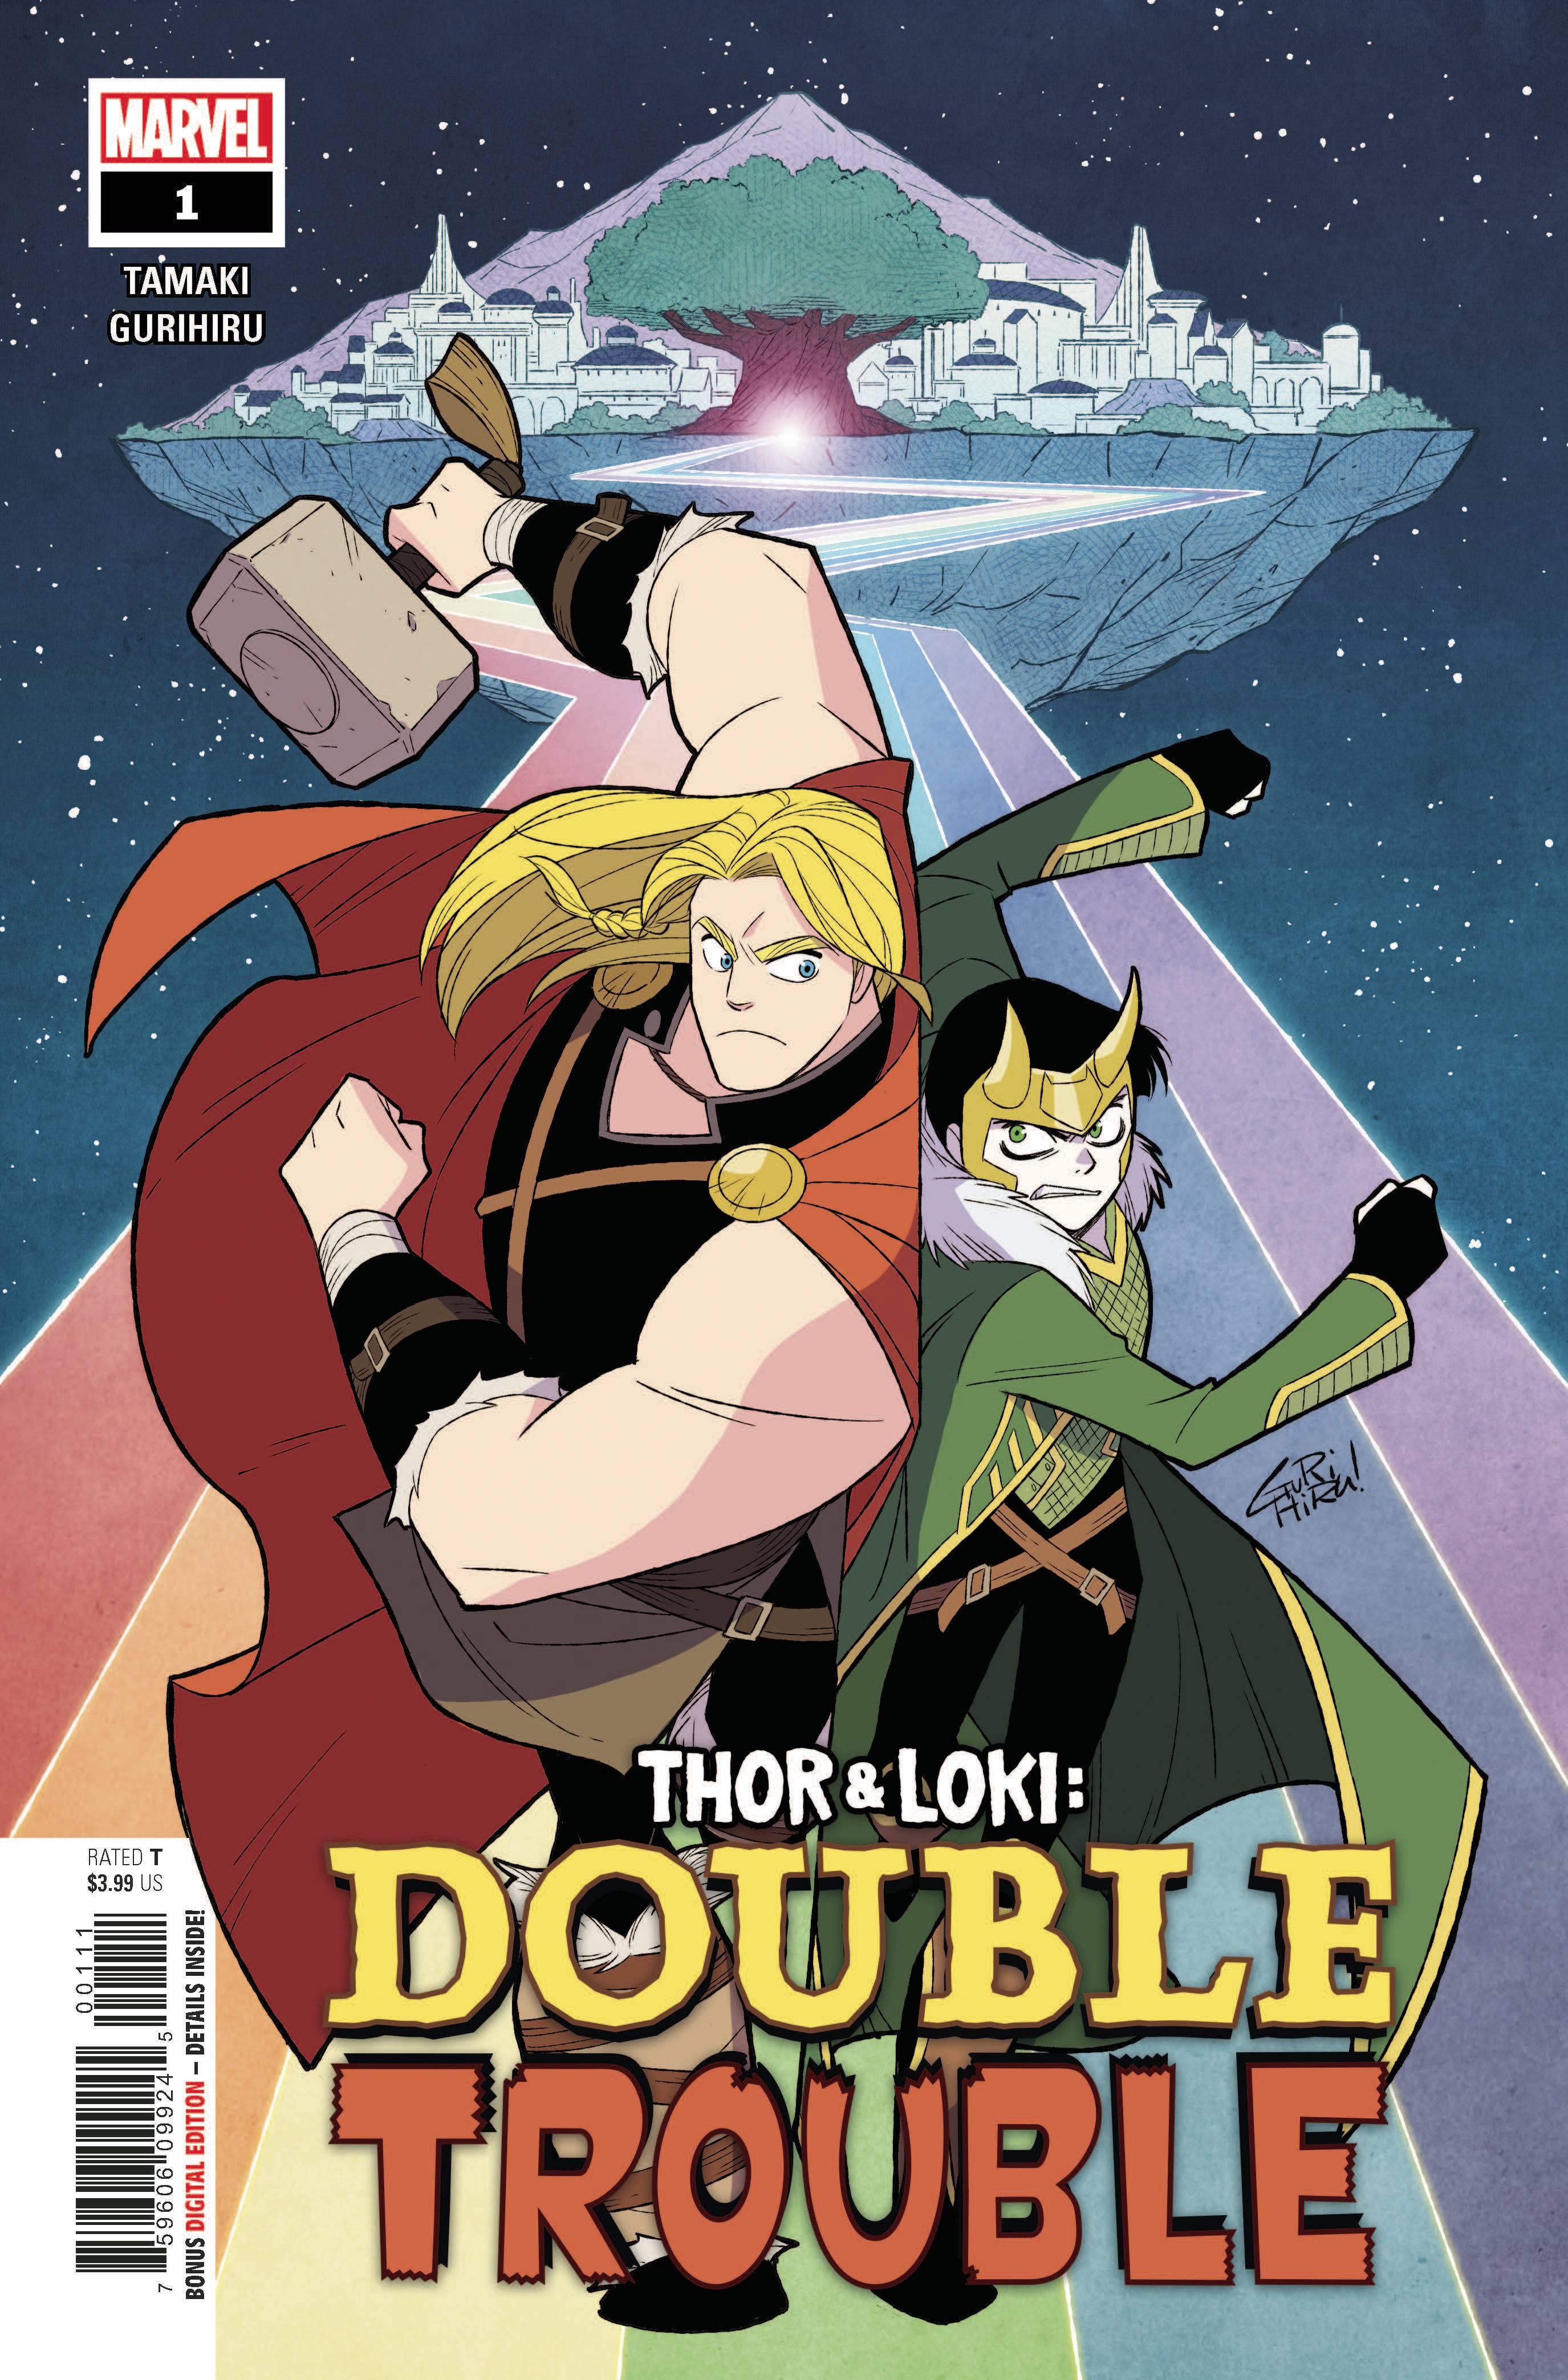 THOR AND LOKI DOUBLE TROUBLE #1 (OF 4)